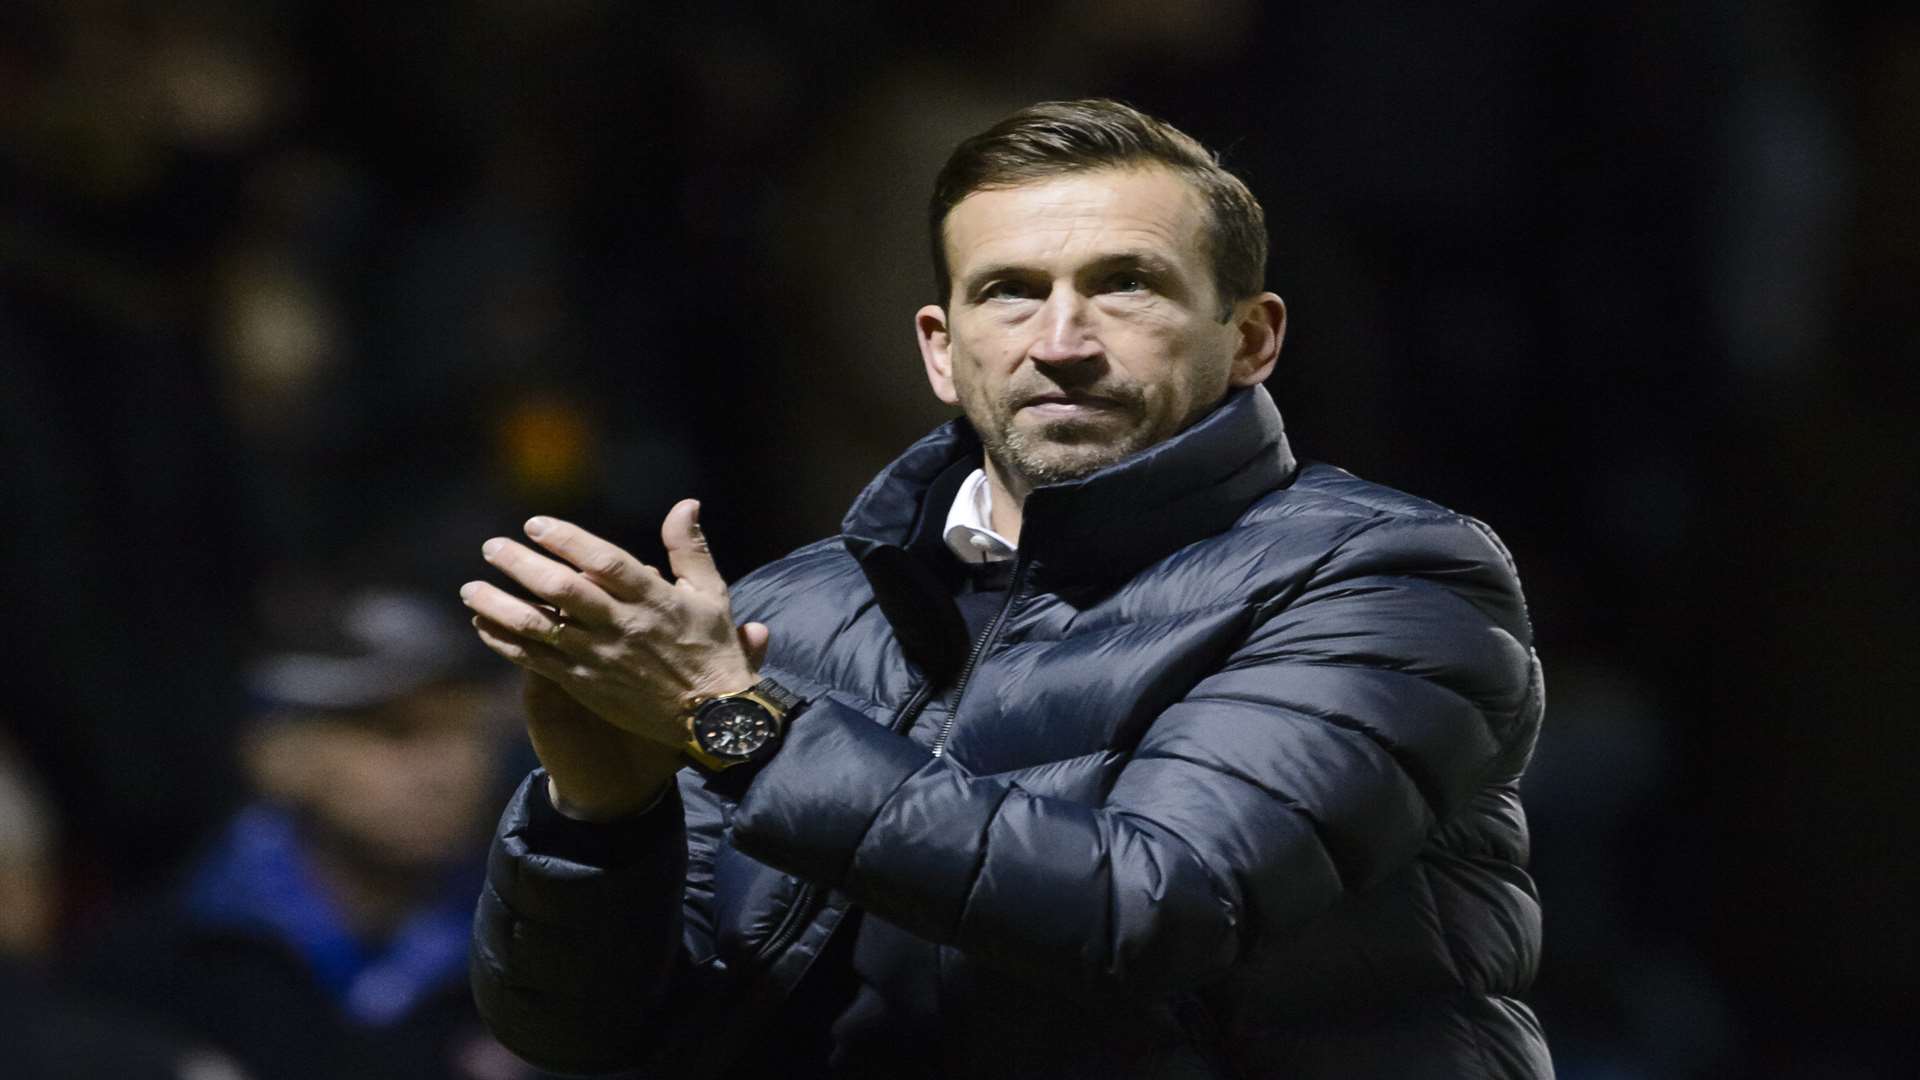 Edinburgh walks off after defeat to Oxford, with calls for his sacking by fans. They got what they wanted.